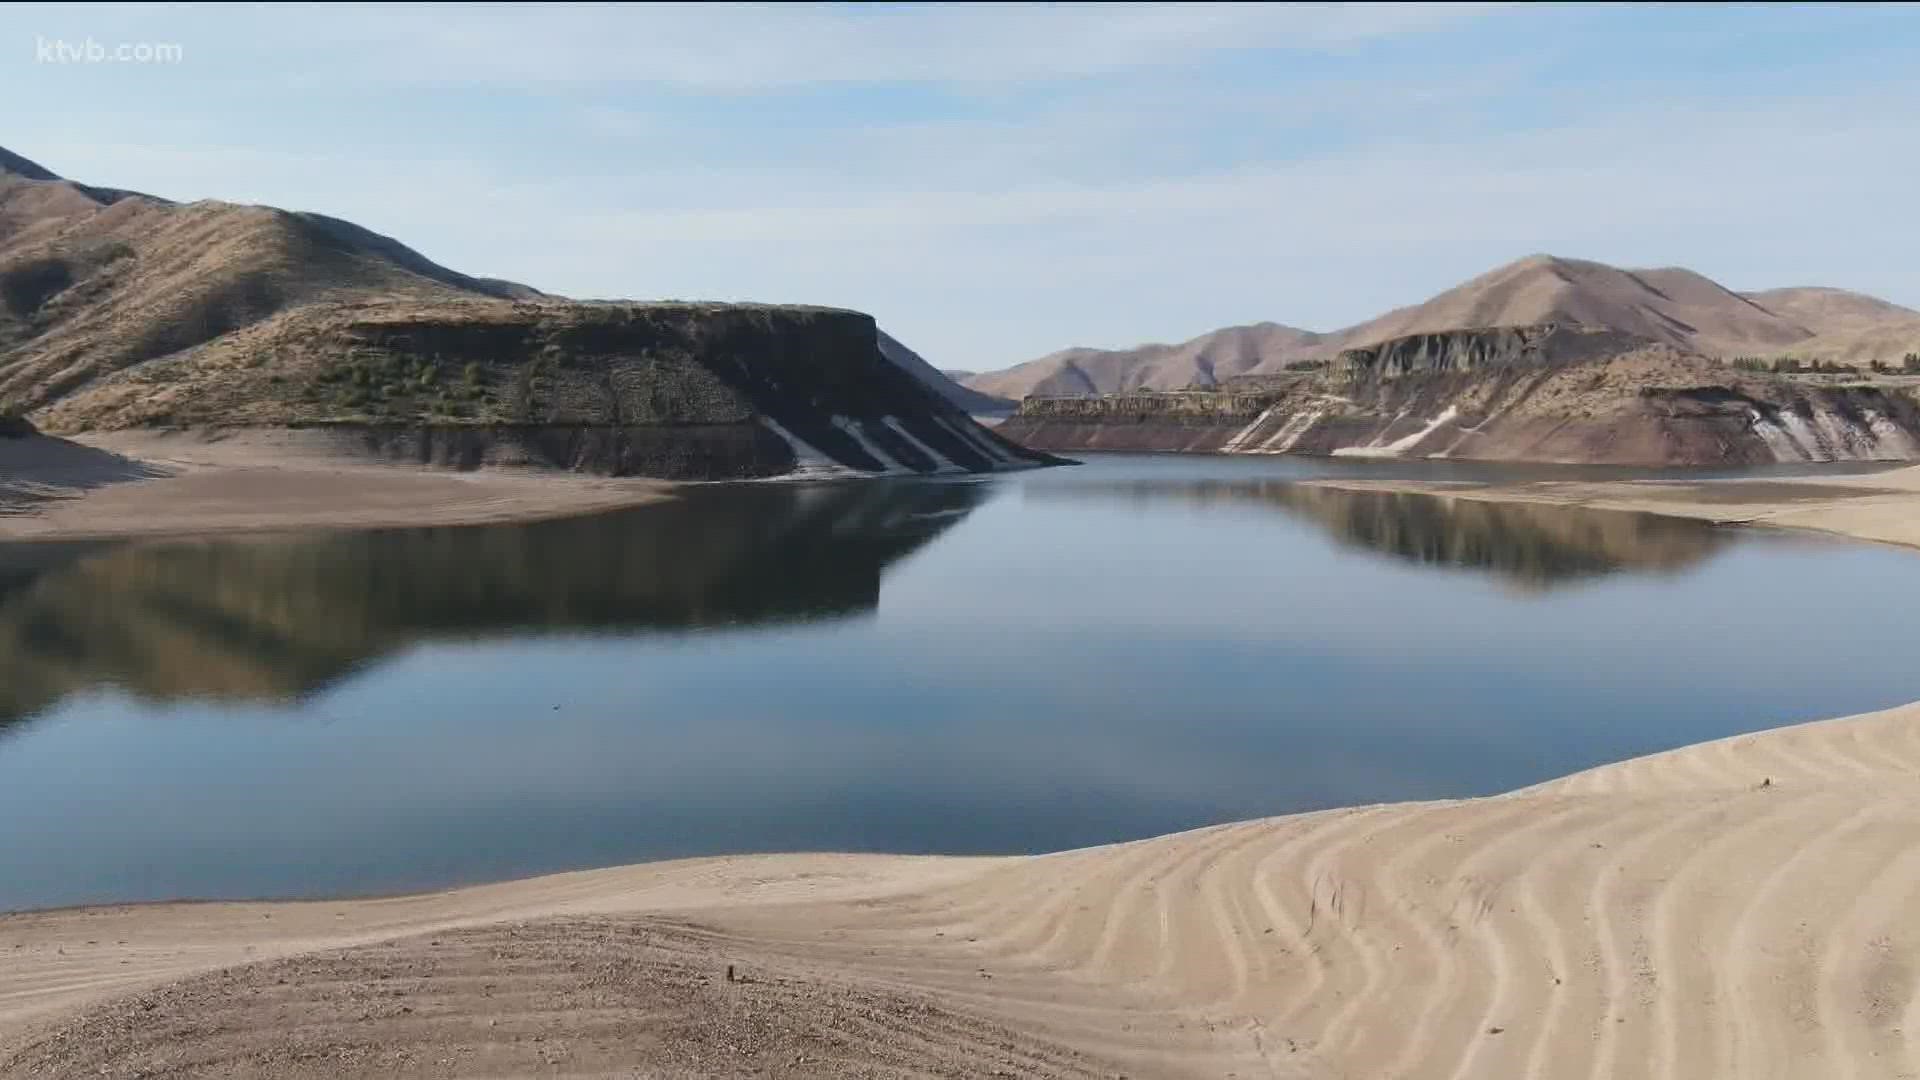 "Fifty percent of the state is currently in severe drought, and that percentage will increase in the coming months,” hydrologist David Hoekema said.